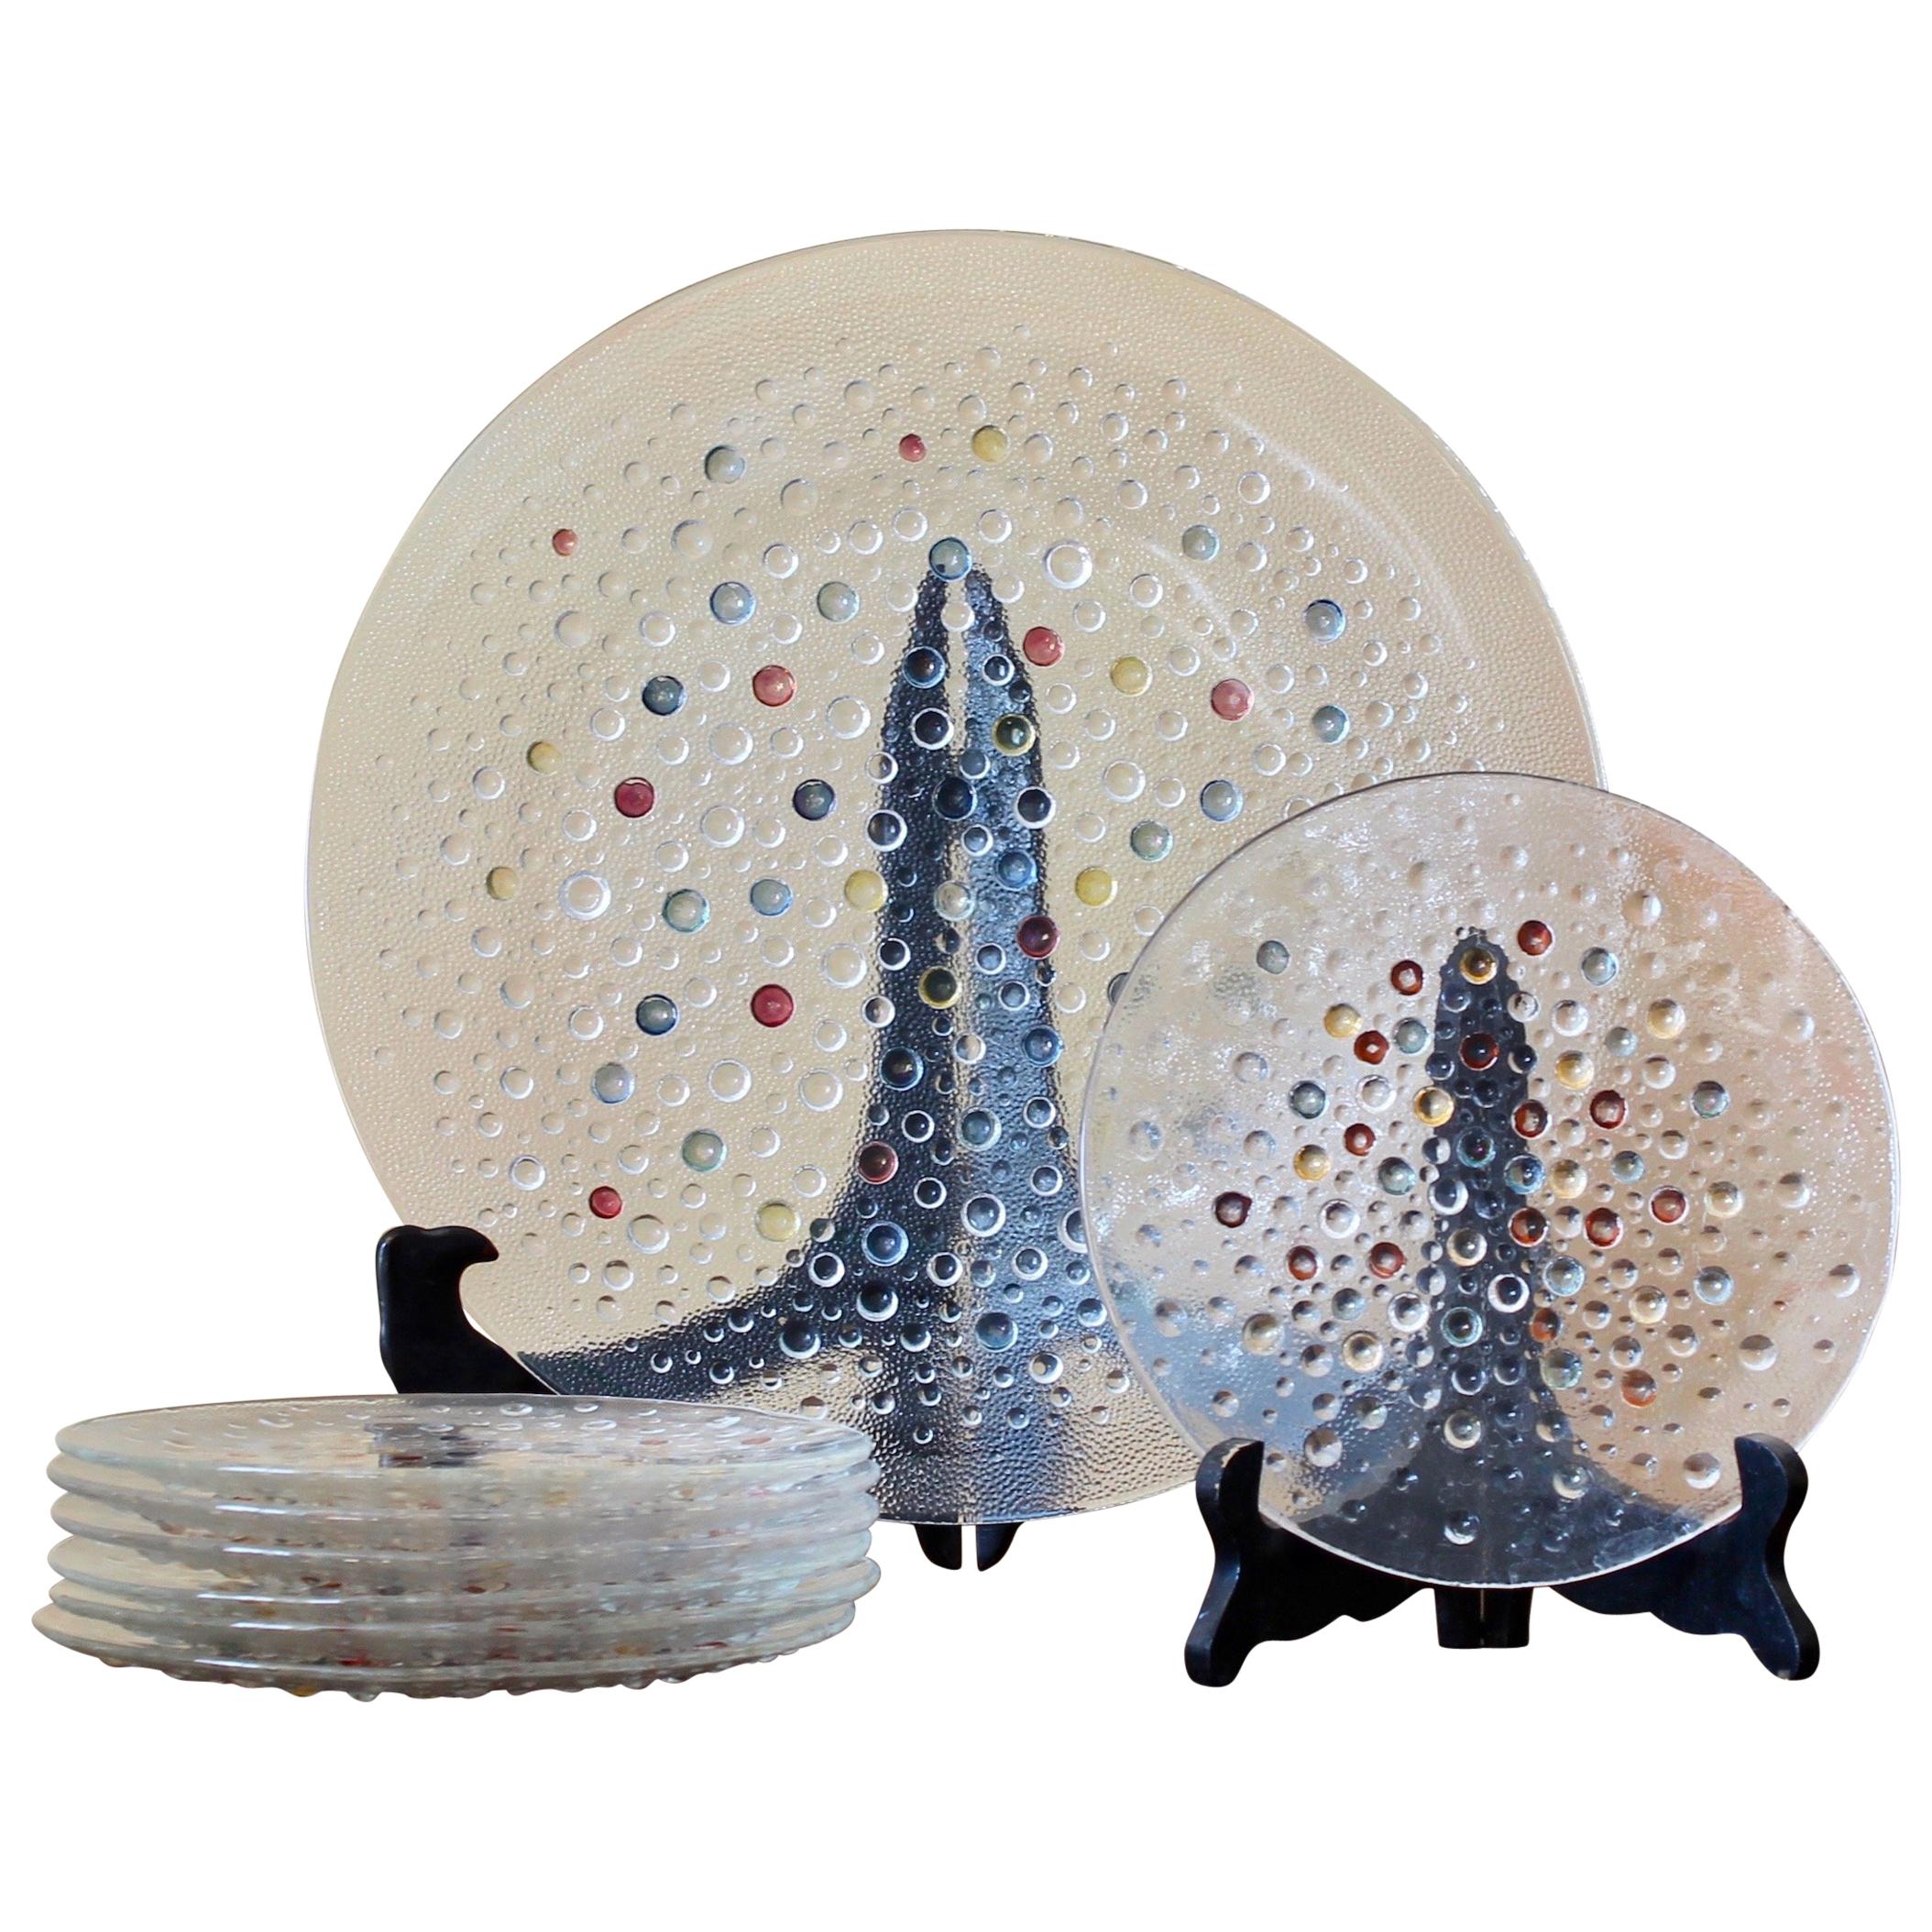 Asteroid Serving and Dessert Plates by Jan Sylwester Drost, Pressed Glass, 1970s